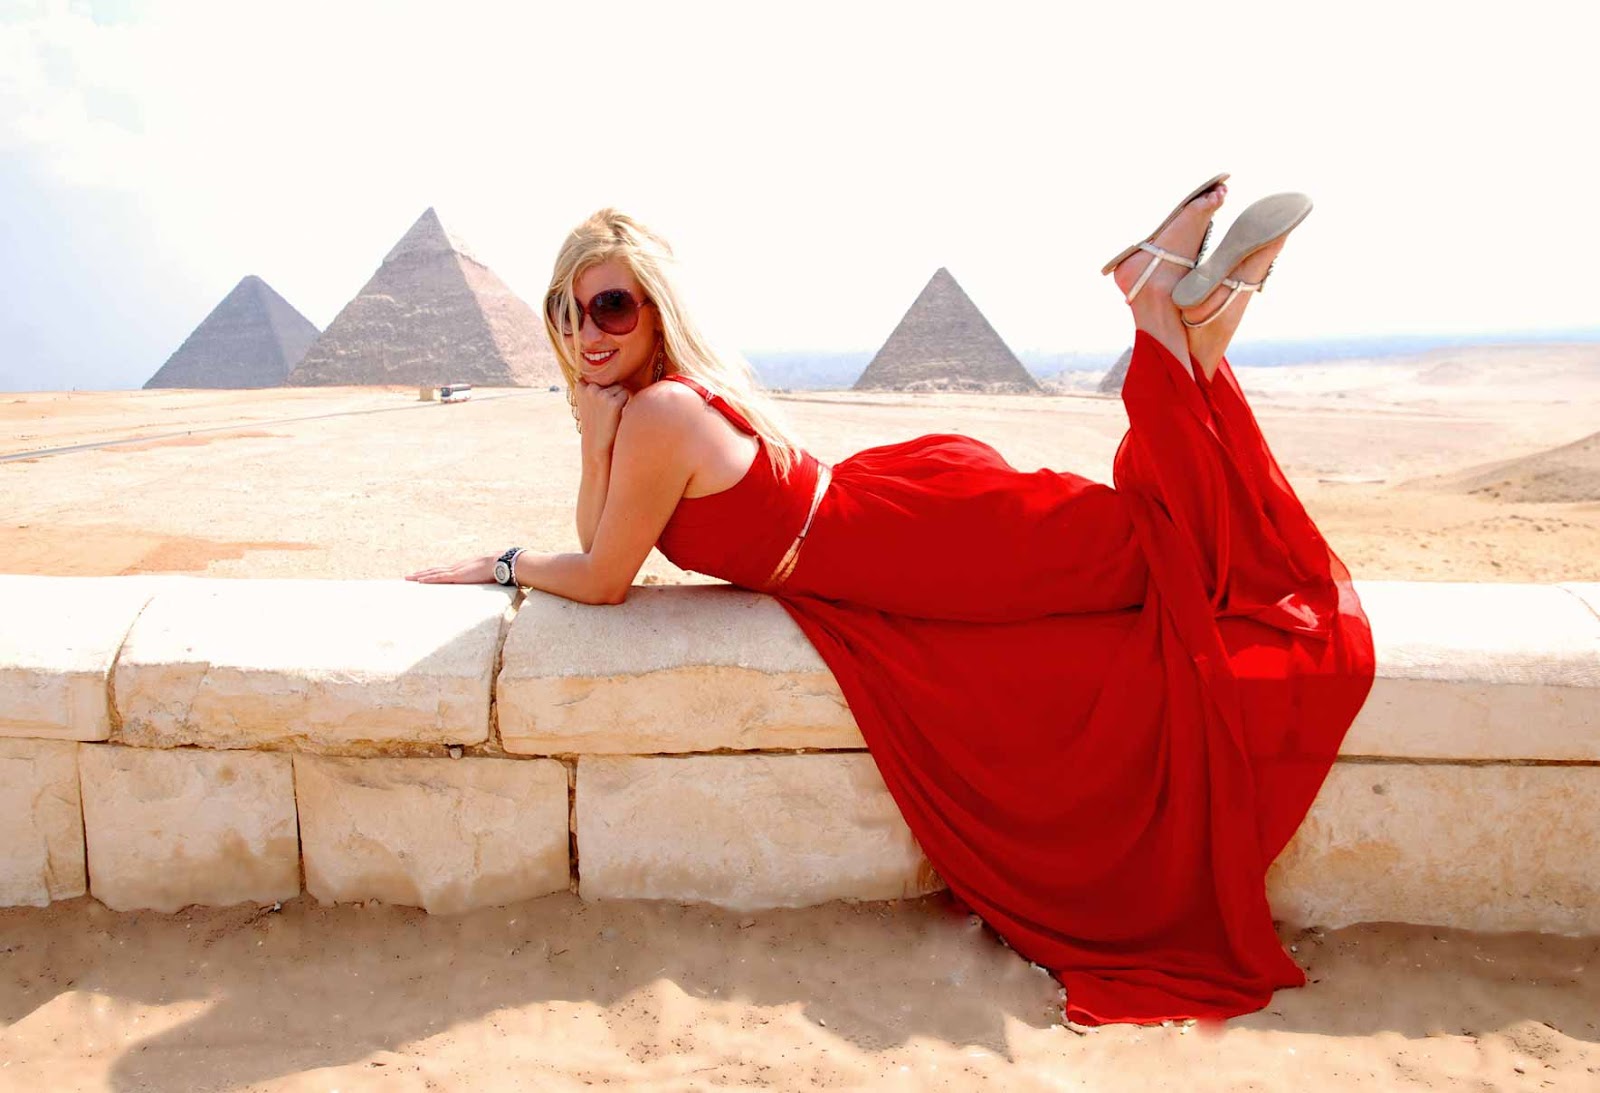 Solo Female Travel Egypt Travel Safety Cultural Sensitivity Accommodation Tips Transportation in Egypt Communication Abroad Egyptian Cuisine Historical Sites Health and Wellness Empowerment through Travel